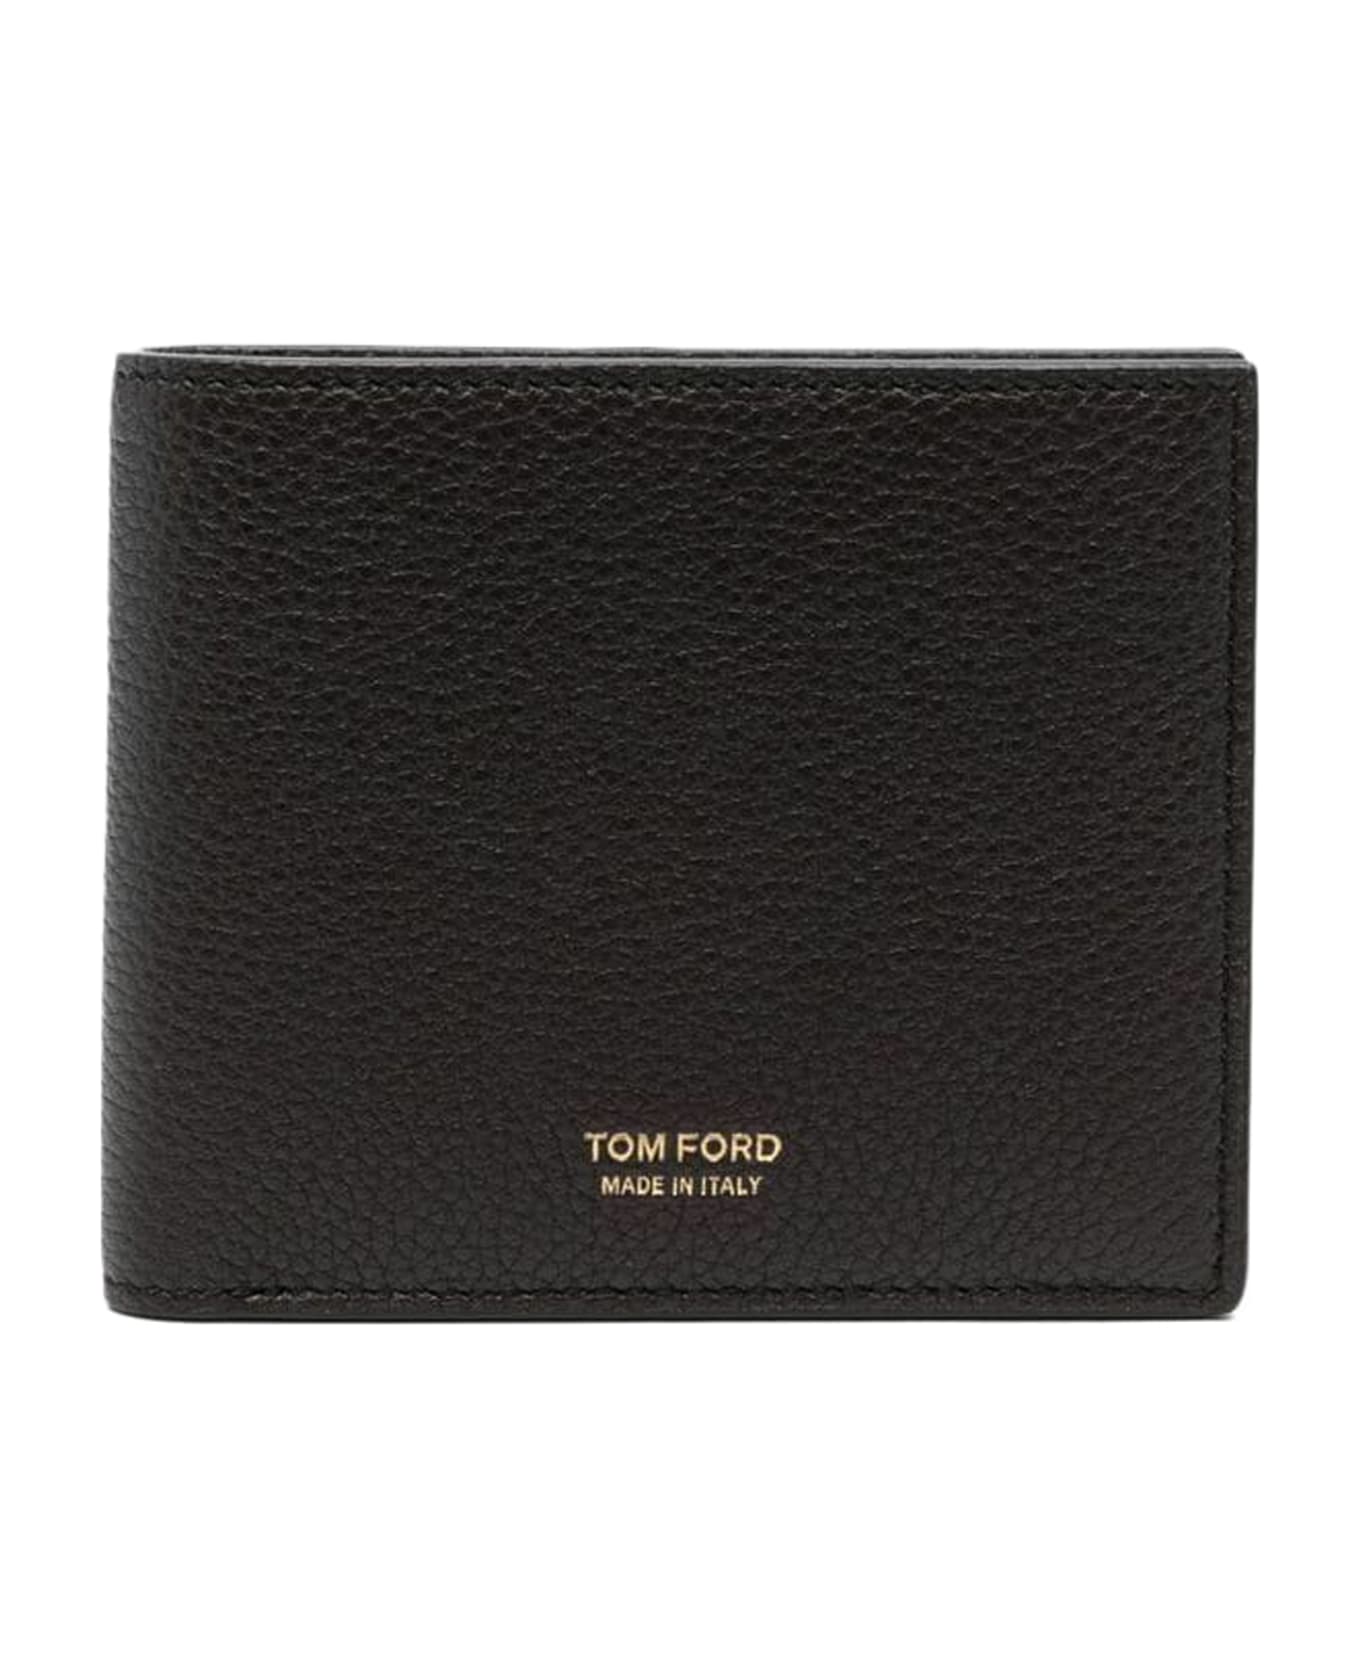 Tom Ford Soft Grain Leather T Line Classic Bifold Wallet - Black